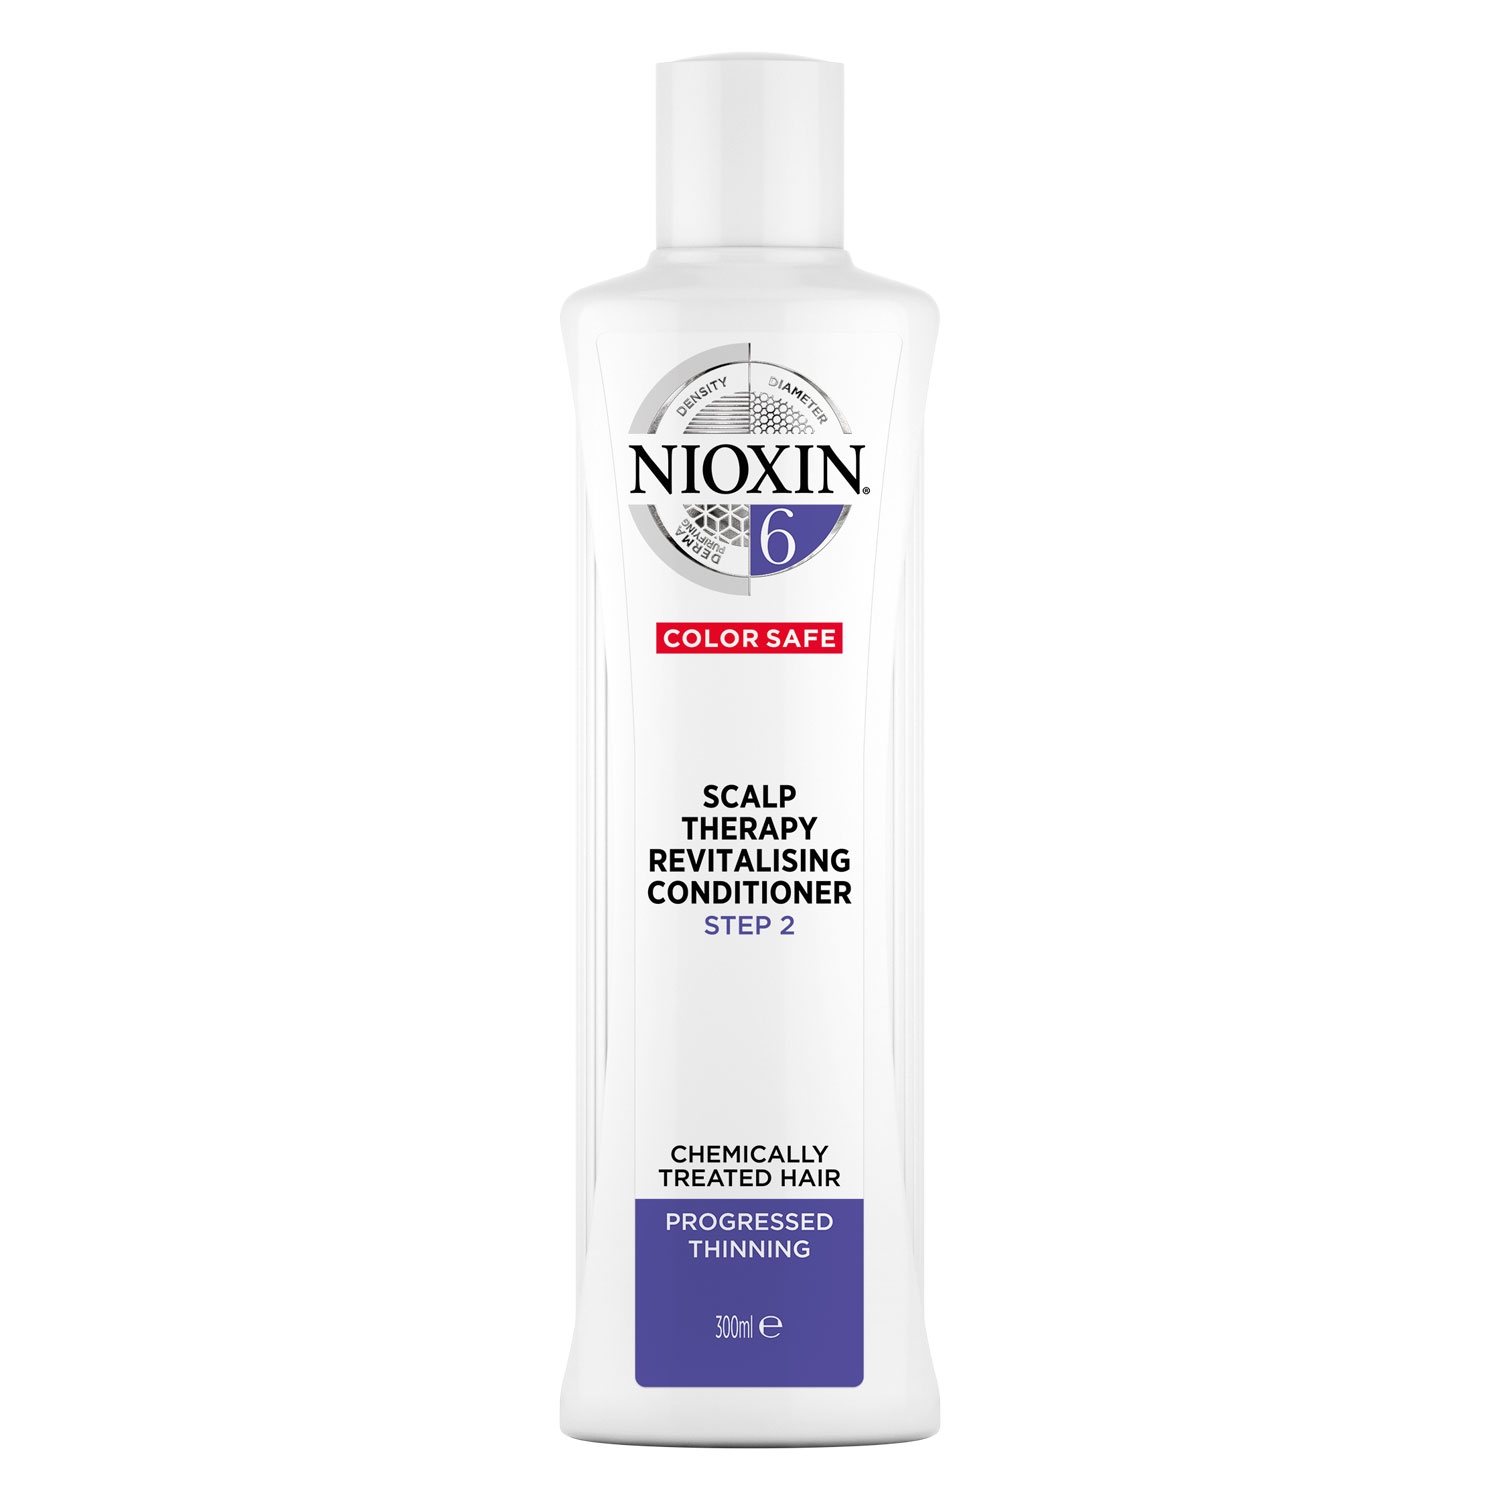 Product image from Nioxin - Scalp Revitaliser 6